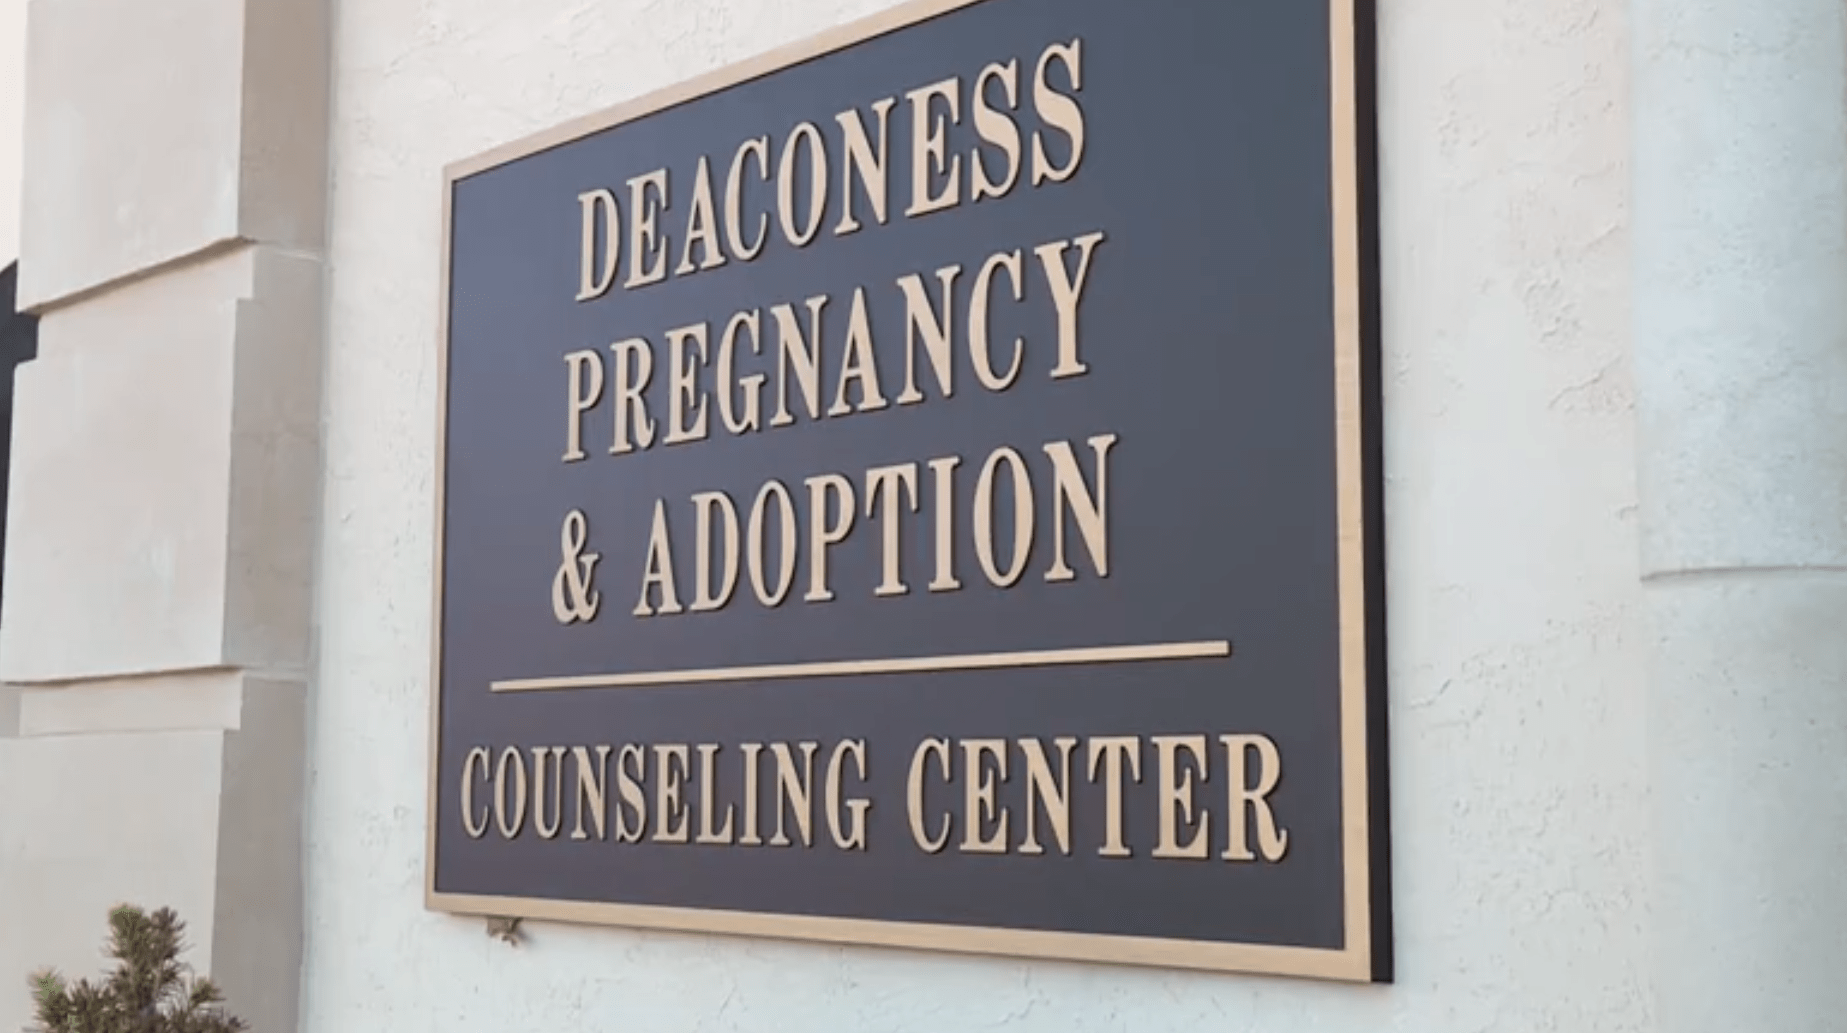 Deaconess Pregnancy and Adoption counseling center sign.